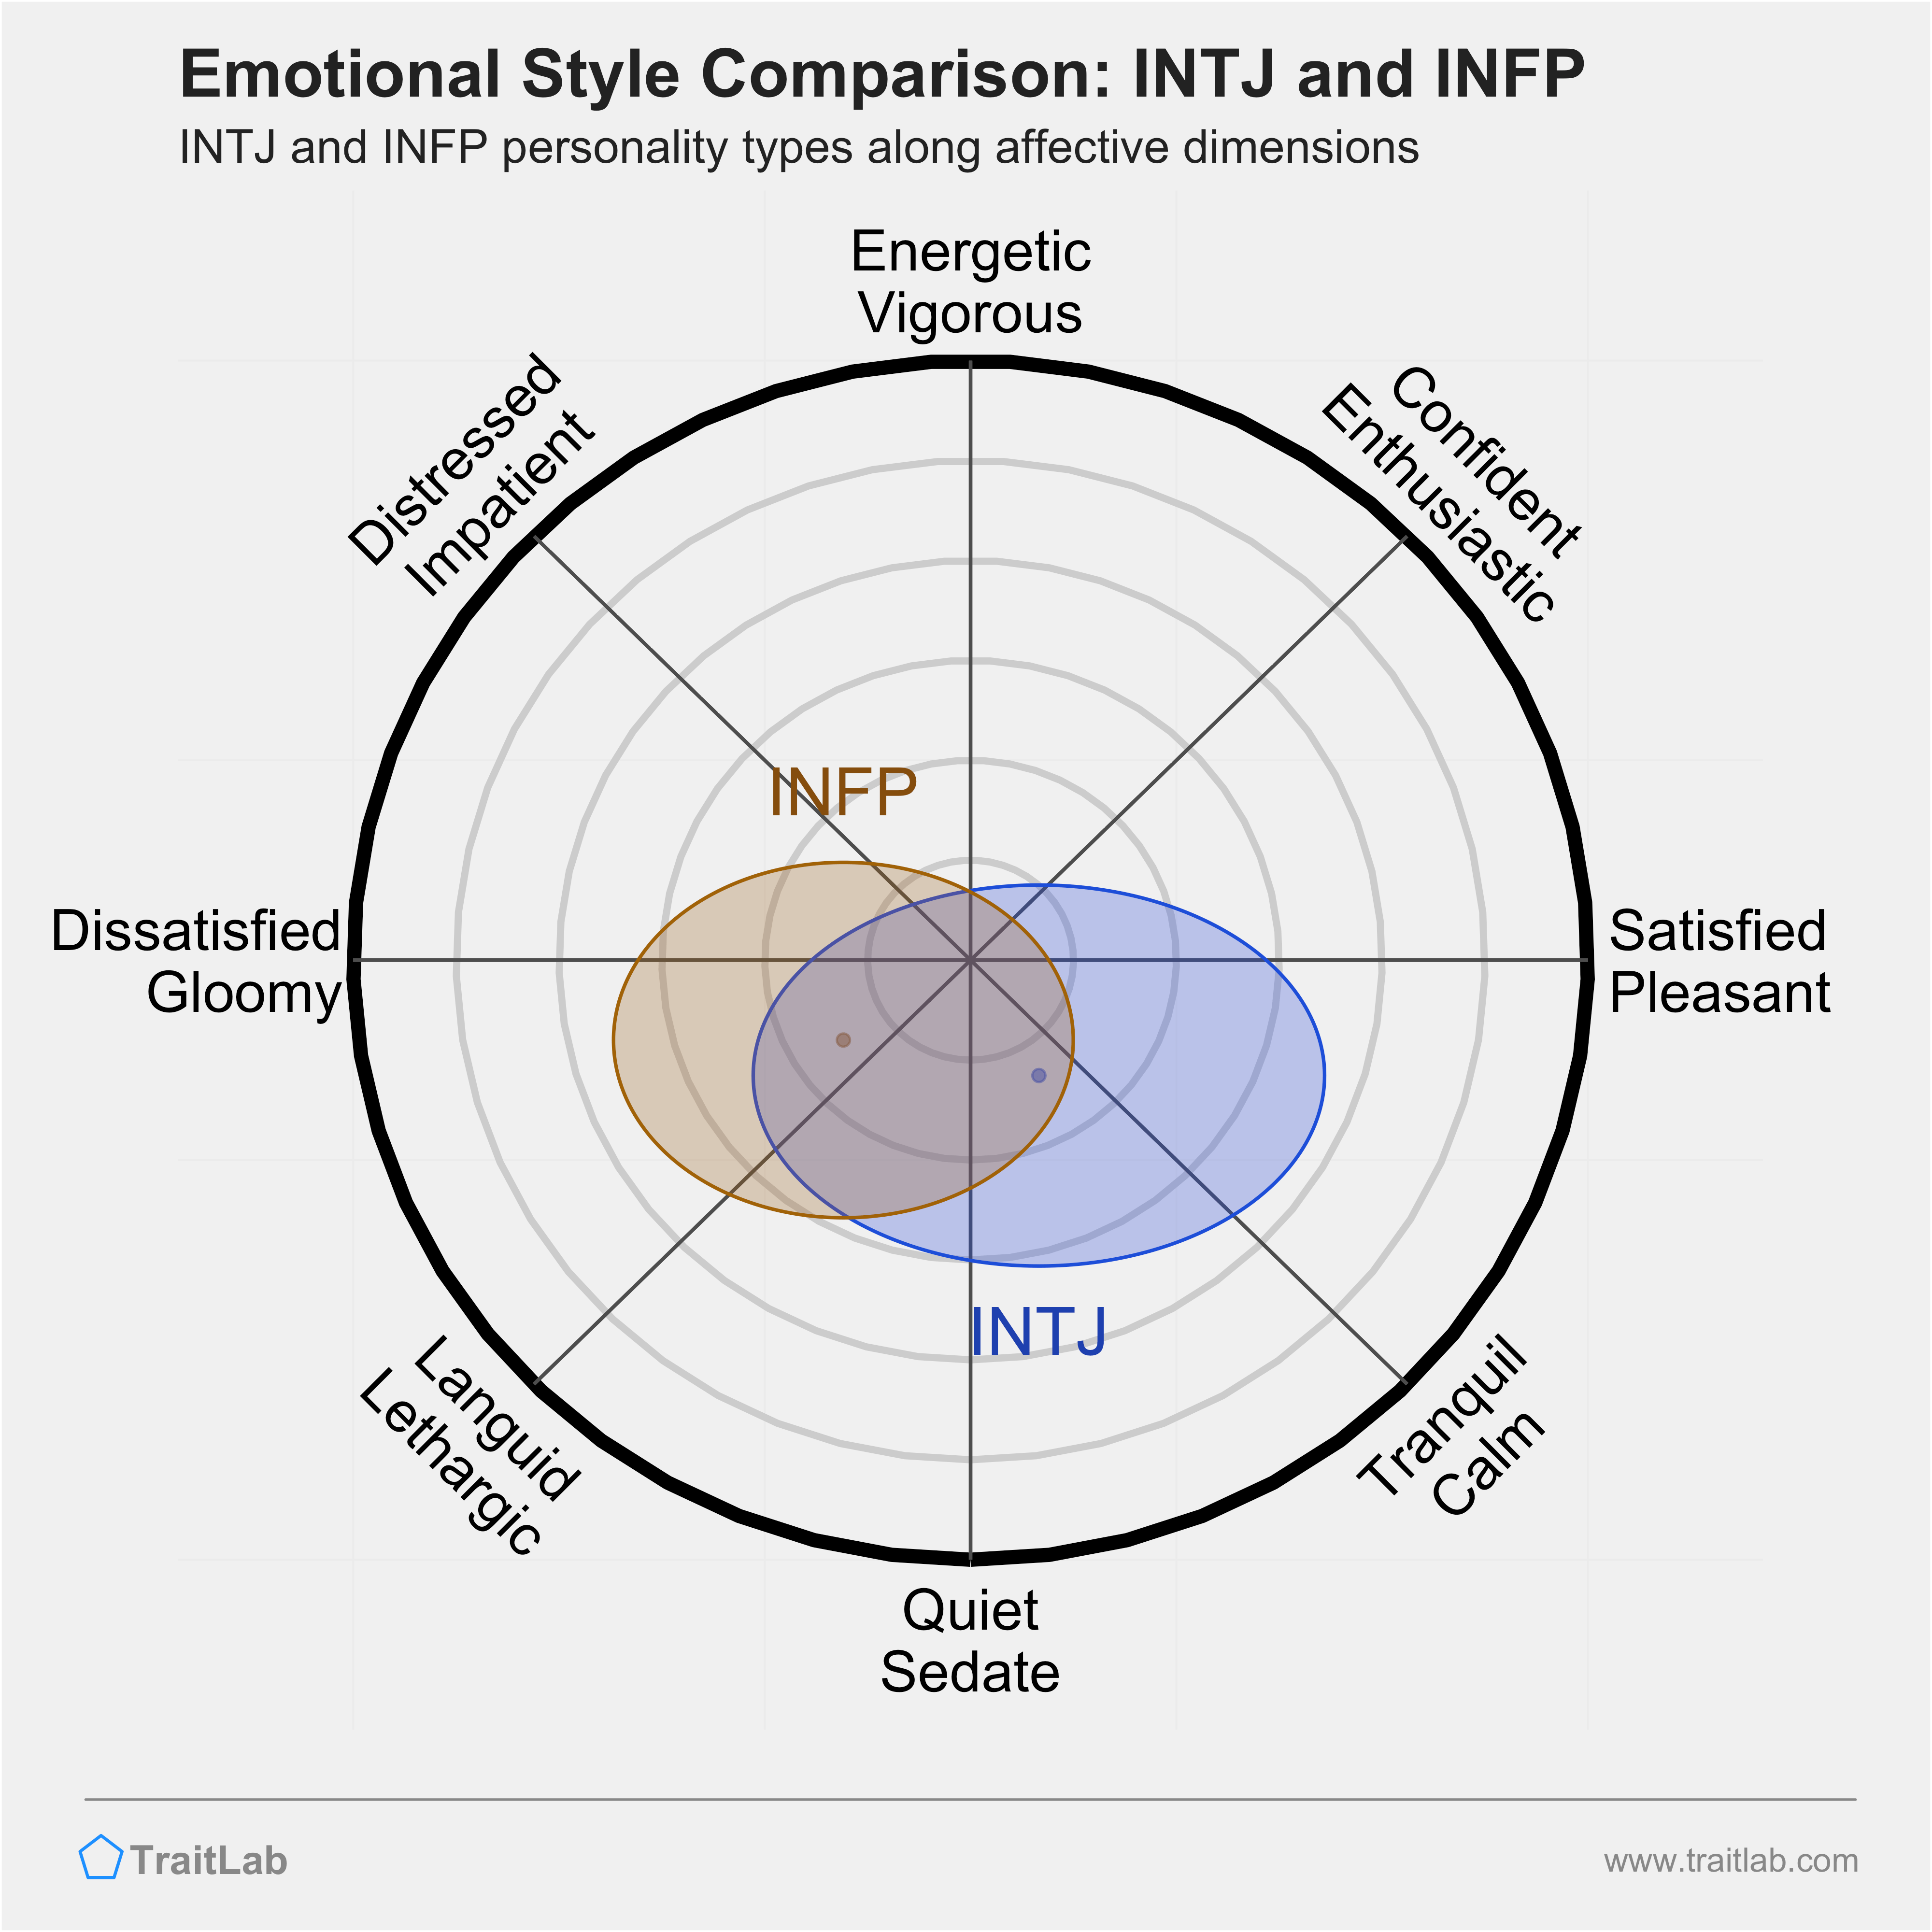 INTJ and INFP comparison across emotional (affective) dimensions